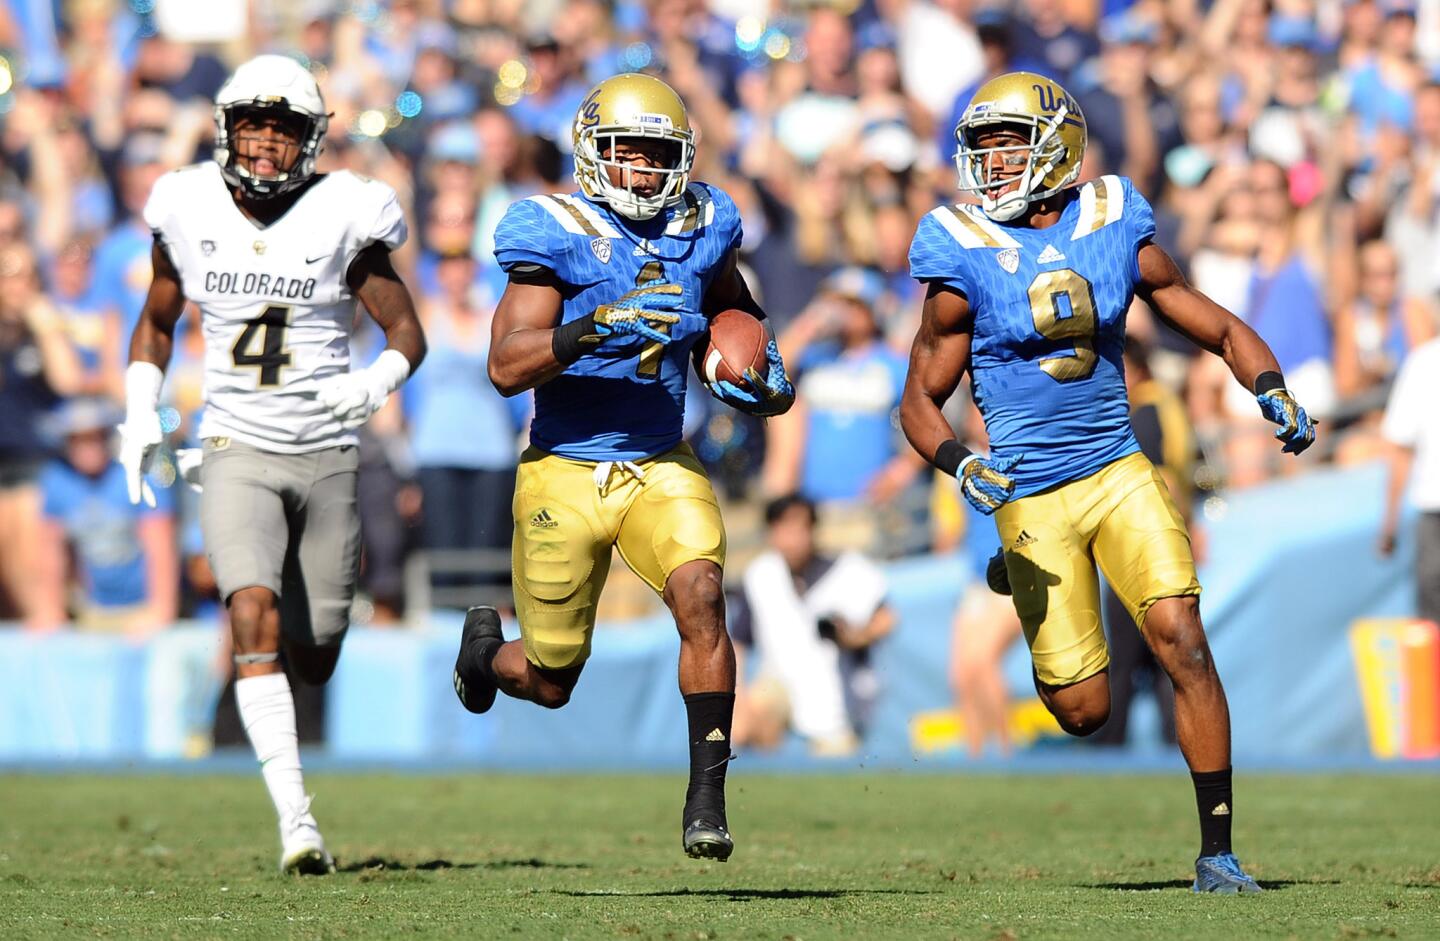 Wild win over Colorado is a real gut check for UCLA's beleaguered defense